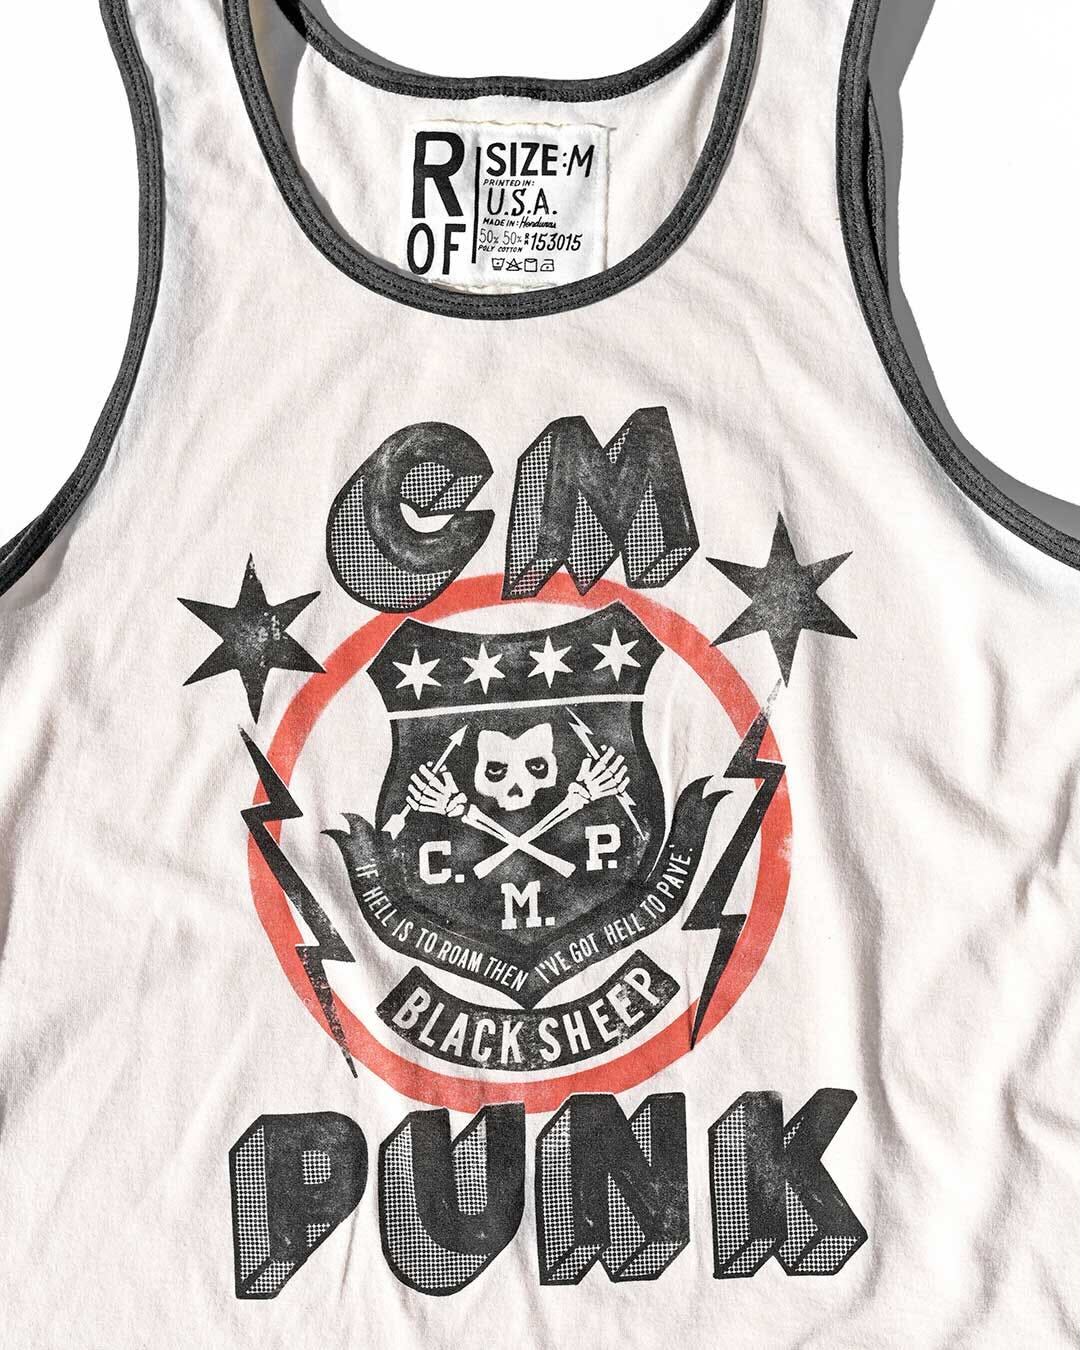 CM Punk Black Sheep White Tank - Roots of Fight